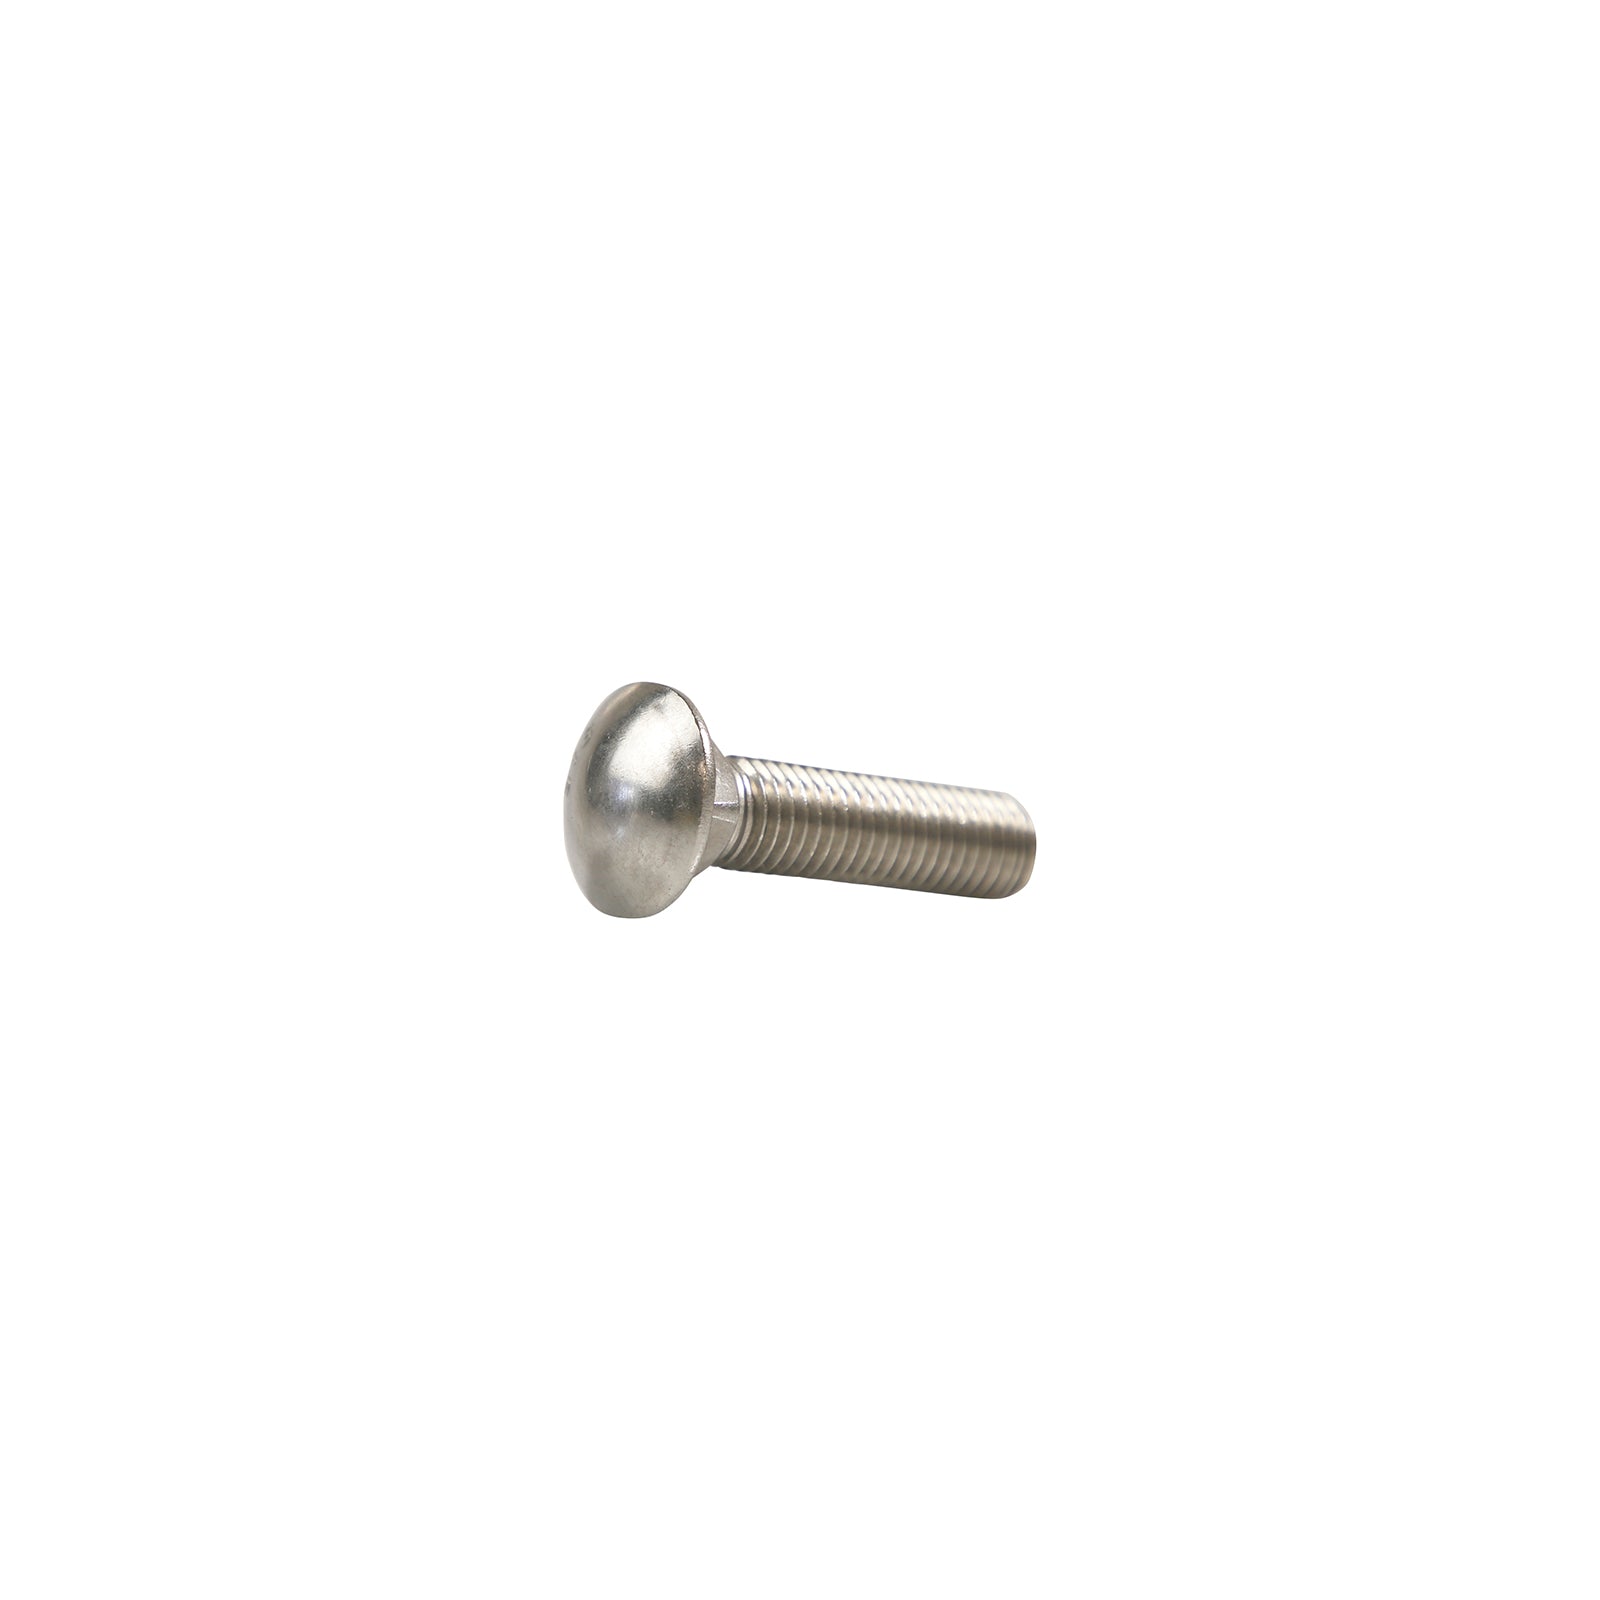 5/8"-11 x 2-1/2" Conquest Carriage Bolt - 316 Stainless Steel